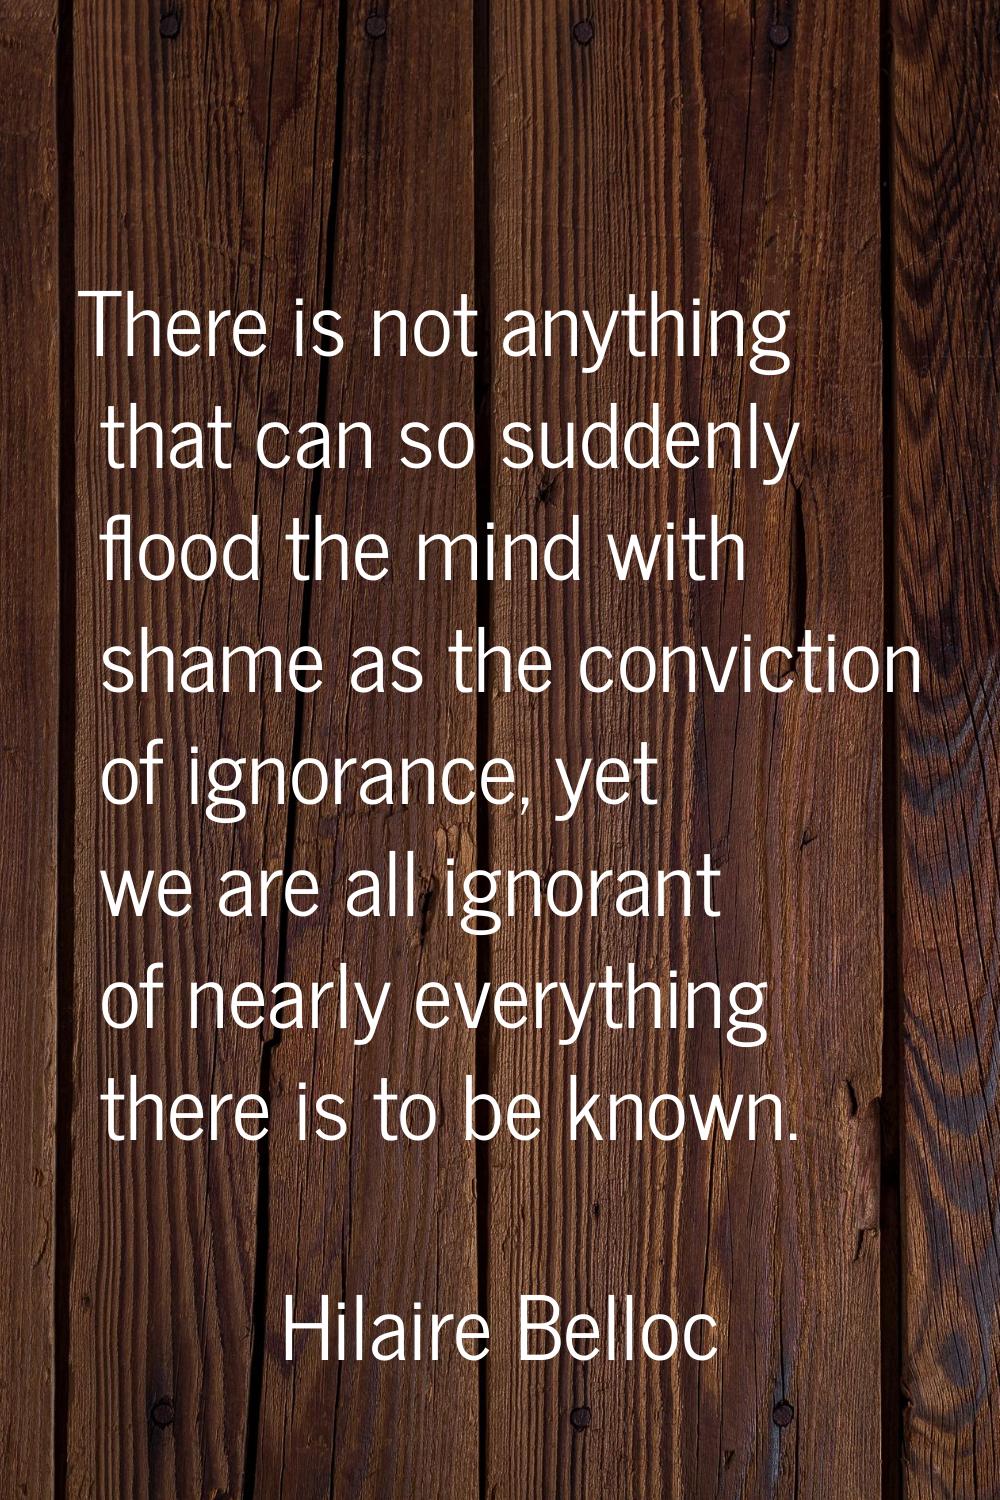 There is not anything that can so suddenly flood the mind with shame as the conviction of ignorance